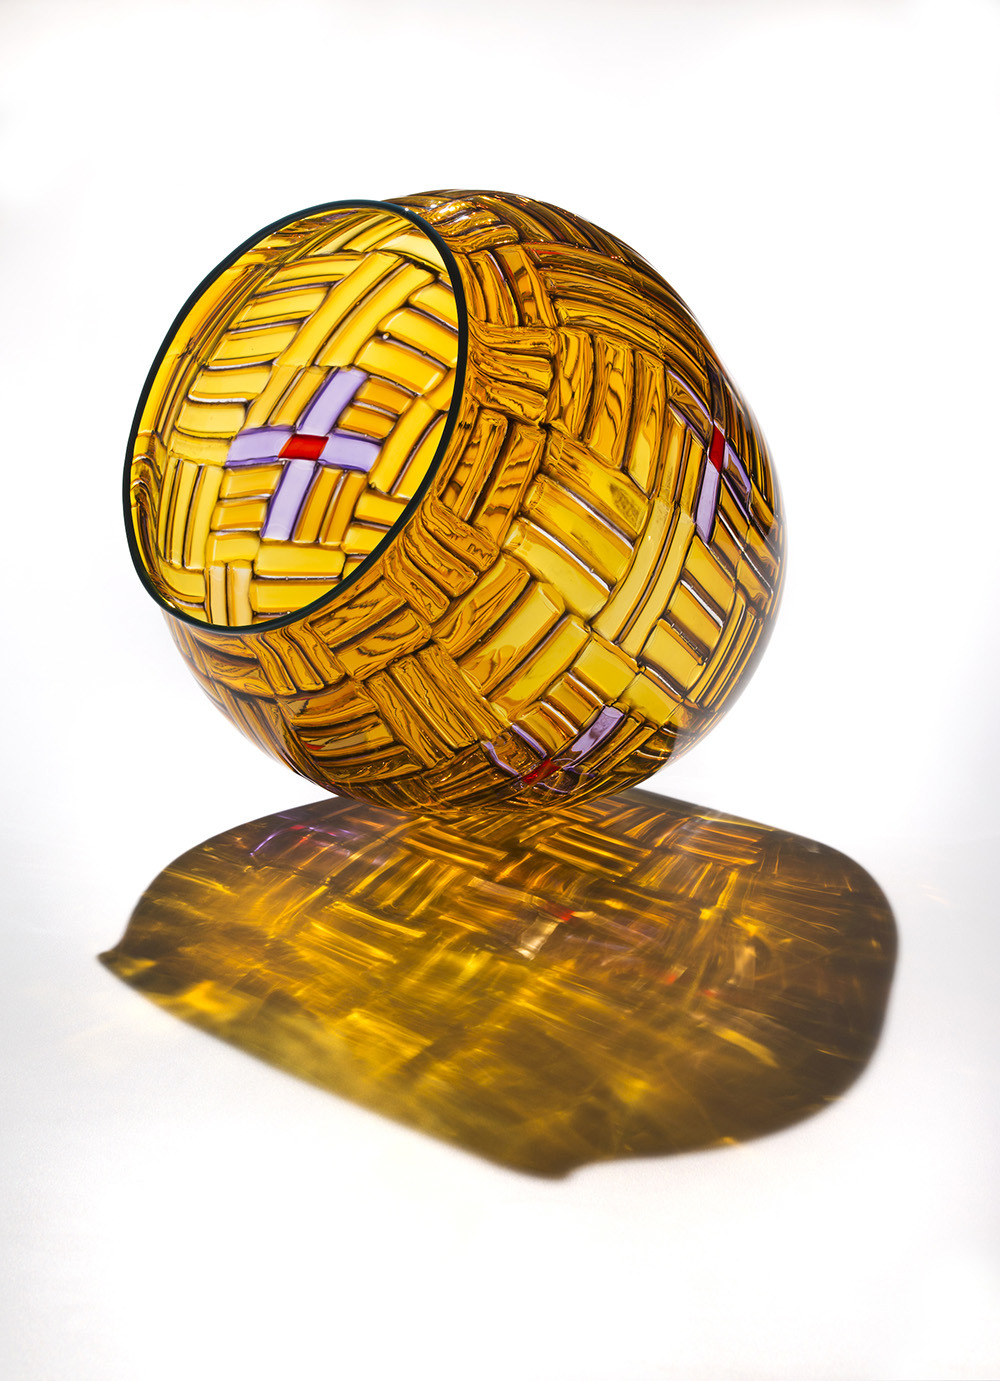 Aunt Fran’s Star Basket is a three-dimensional blown glass vessel. This basket, made of glass, sits on a rounded bottom. It has straight sides and a wide mouth.